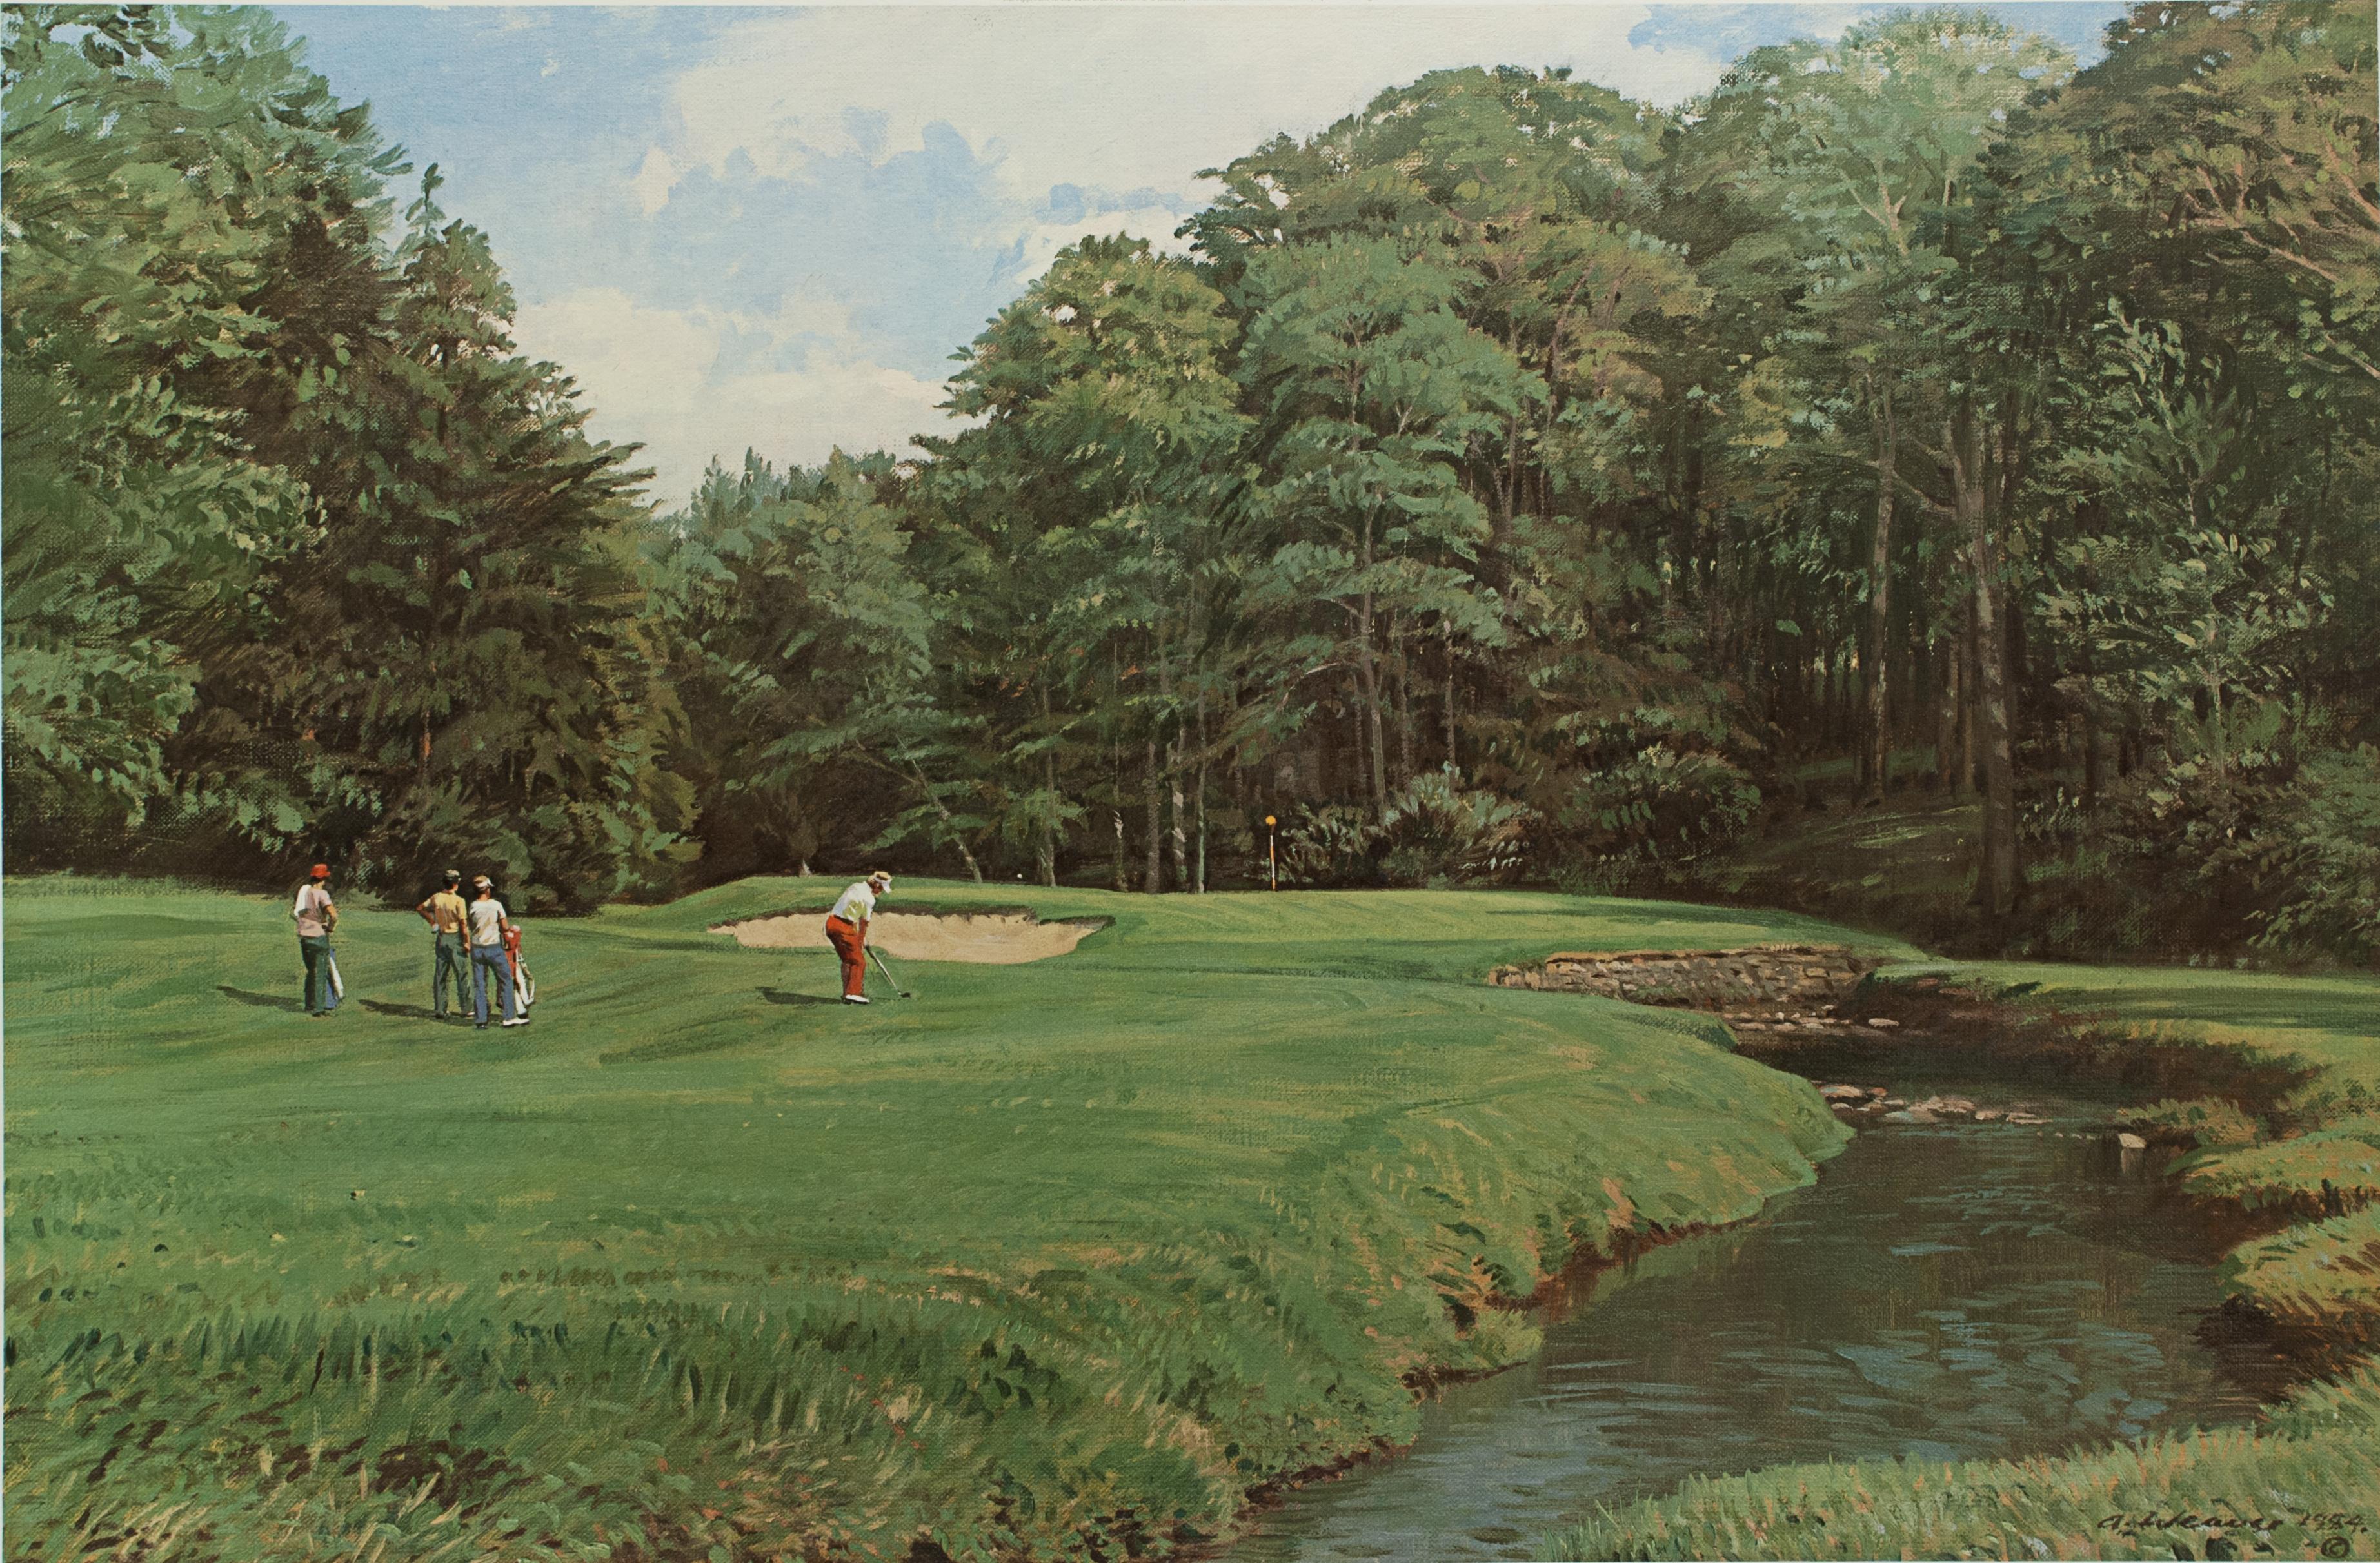 Arthur Weaver golf print, Merion golf club.
A good large golfing photolithograph taken from the original painting by Arthur Weaver, the approach to the 11th green, Merion GC (East). Published 1986 by Sportsman's edge, Ltd. Signed in pencil by the